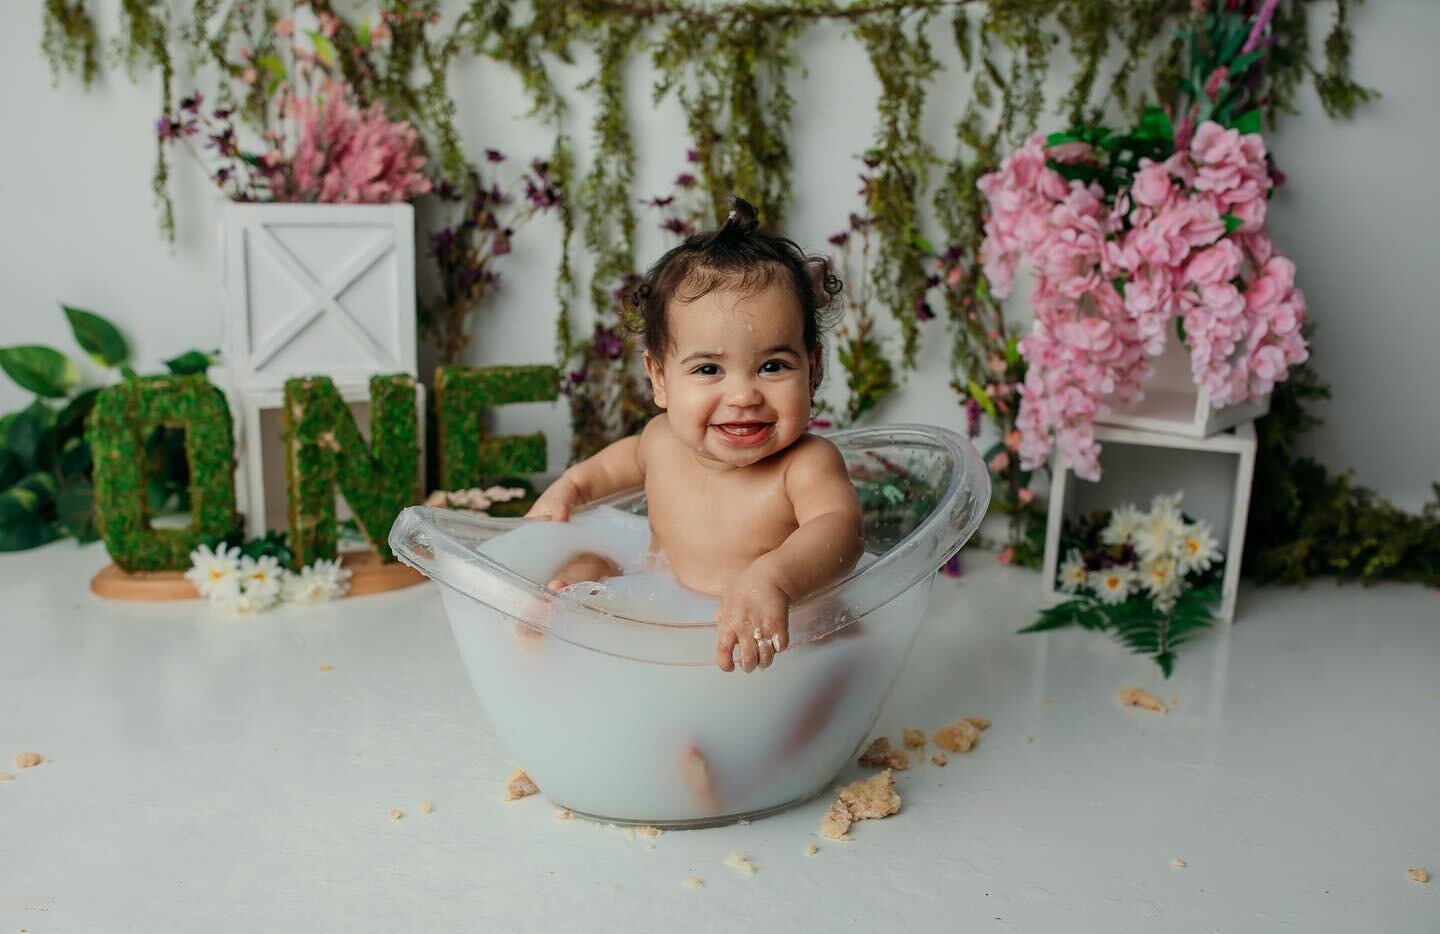 Happy First Birthday Mariah! 💗

Book a cake smash session for the next week and get a FREE splash session. These can be booked April-December of 2024. 

What is a splash session? We do a cake smash and then put baby in a tub after the messy cake! It